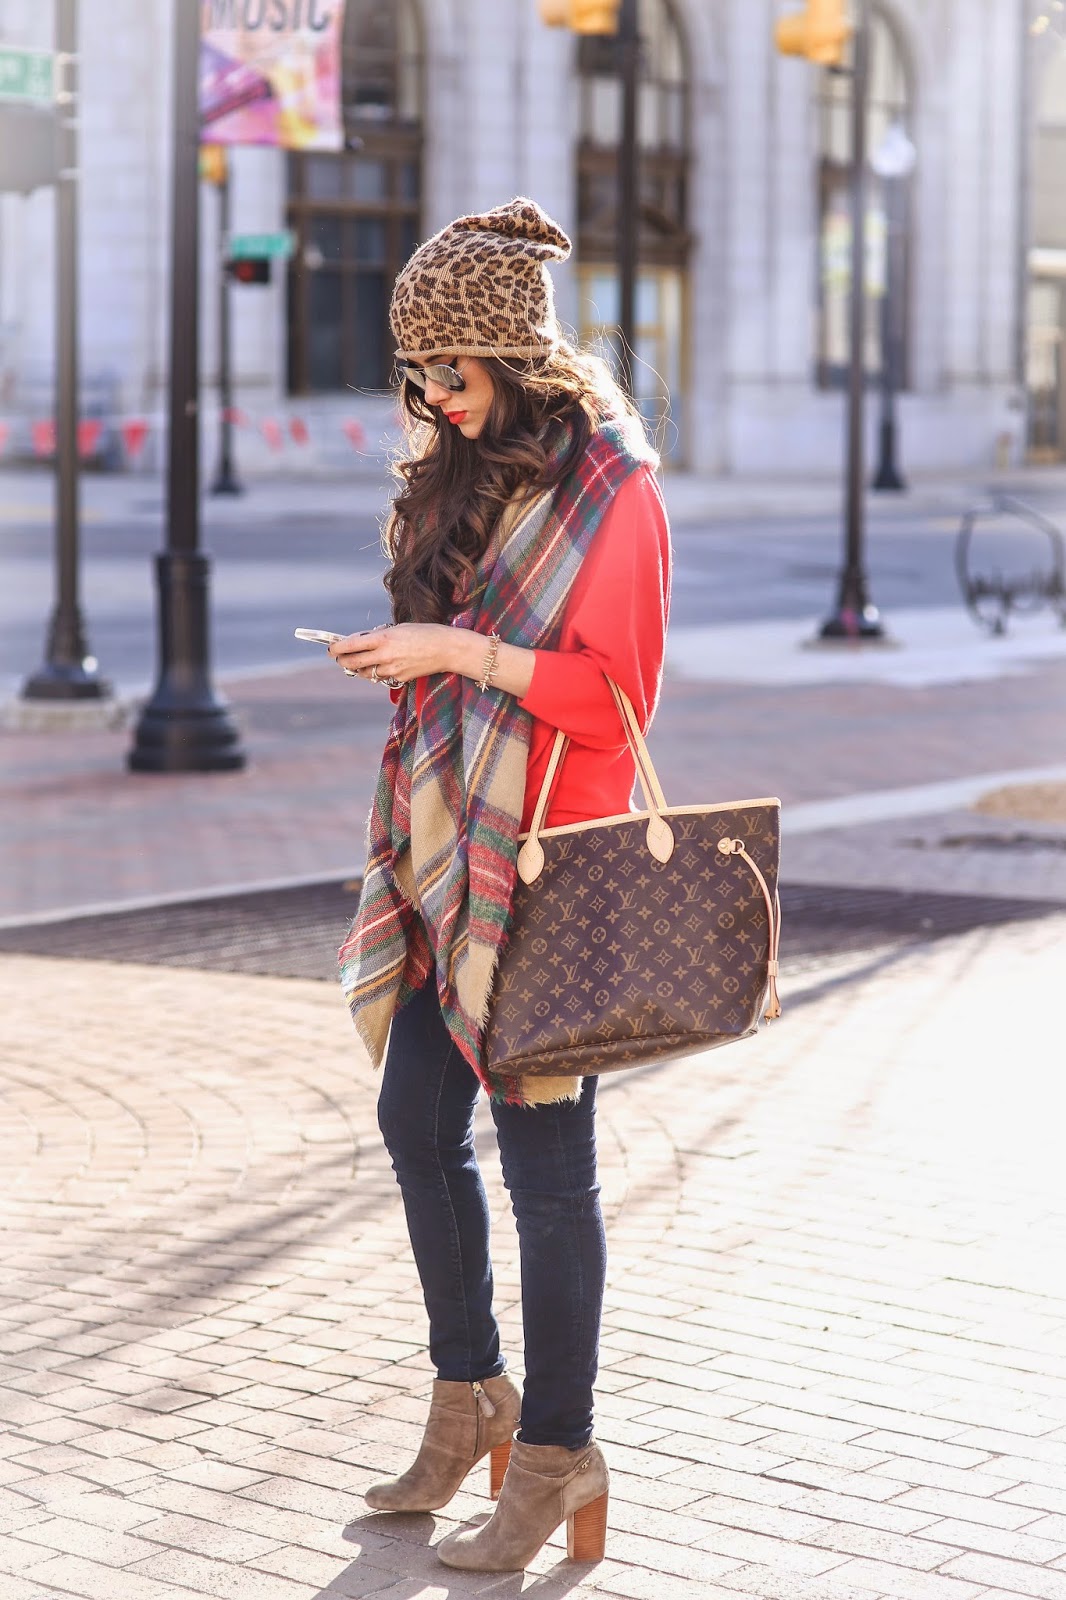 leopard print beanie, tulsa ok fashion blog, fall outfit ideas pinterest, blanket scarf outfit ideas, how to style a blanket scarf, pinterest fall ootd, booties with scarf outfit, emily gemma, red sweater with blanket scarf